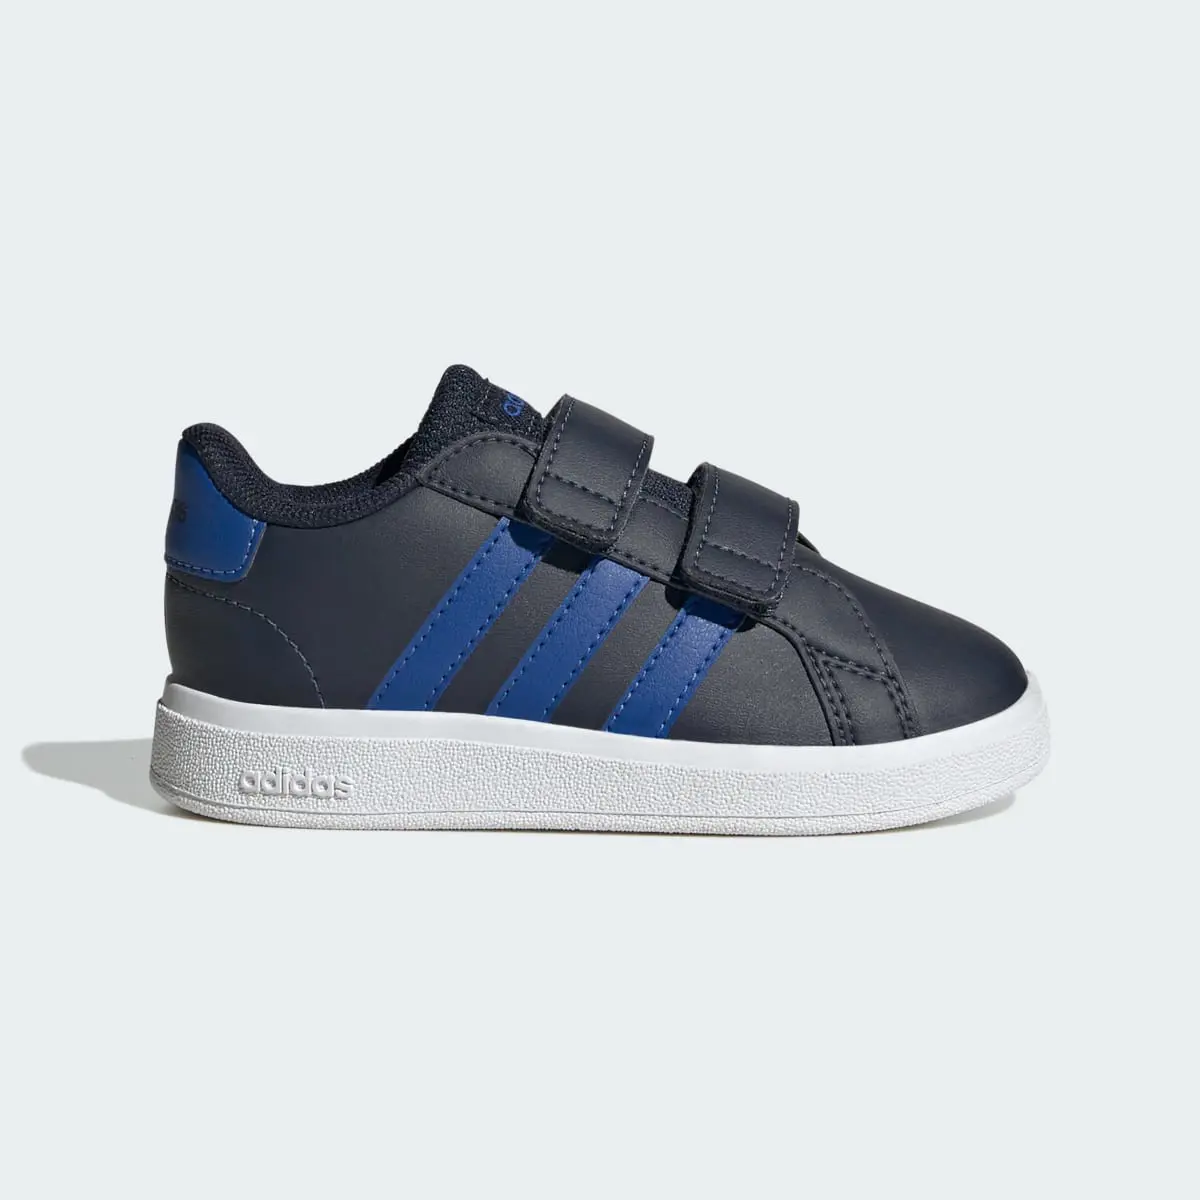 Adidas Grand Court Lifestyle Hook and Loop Schuh. 2